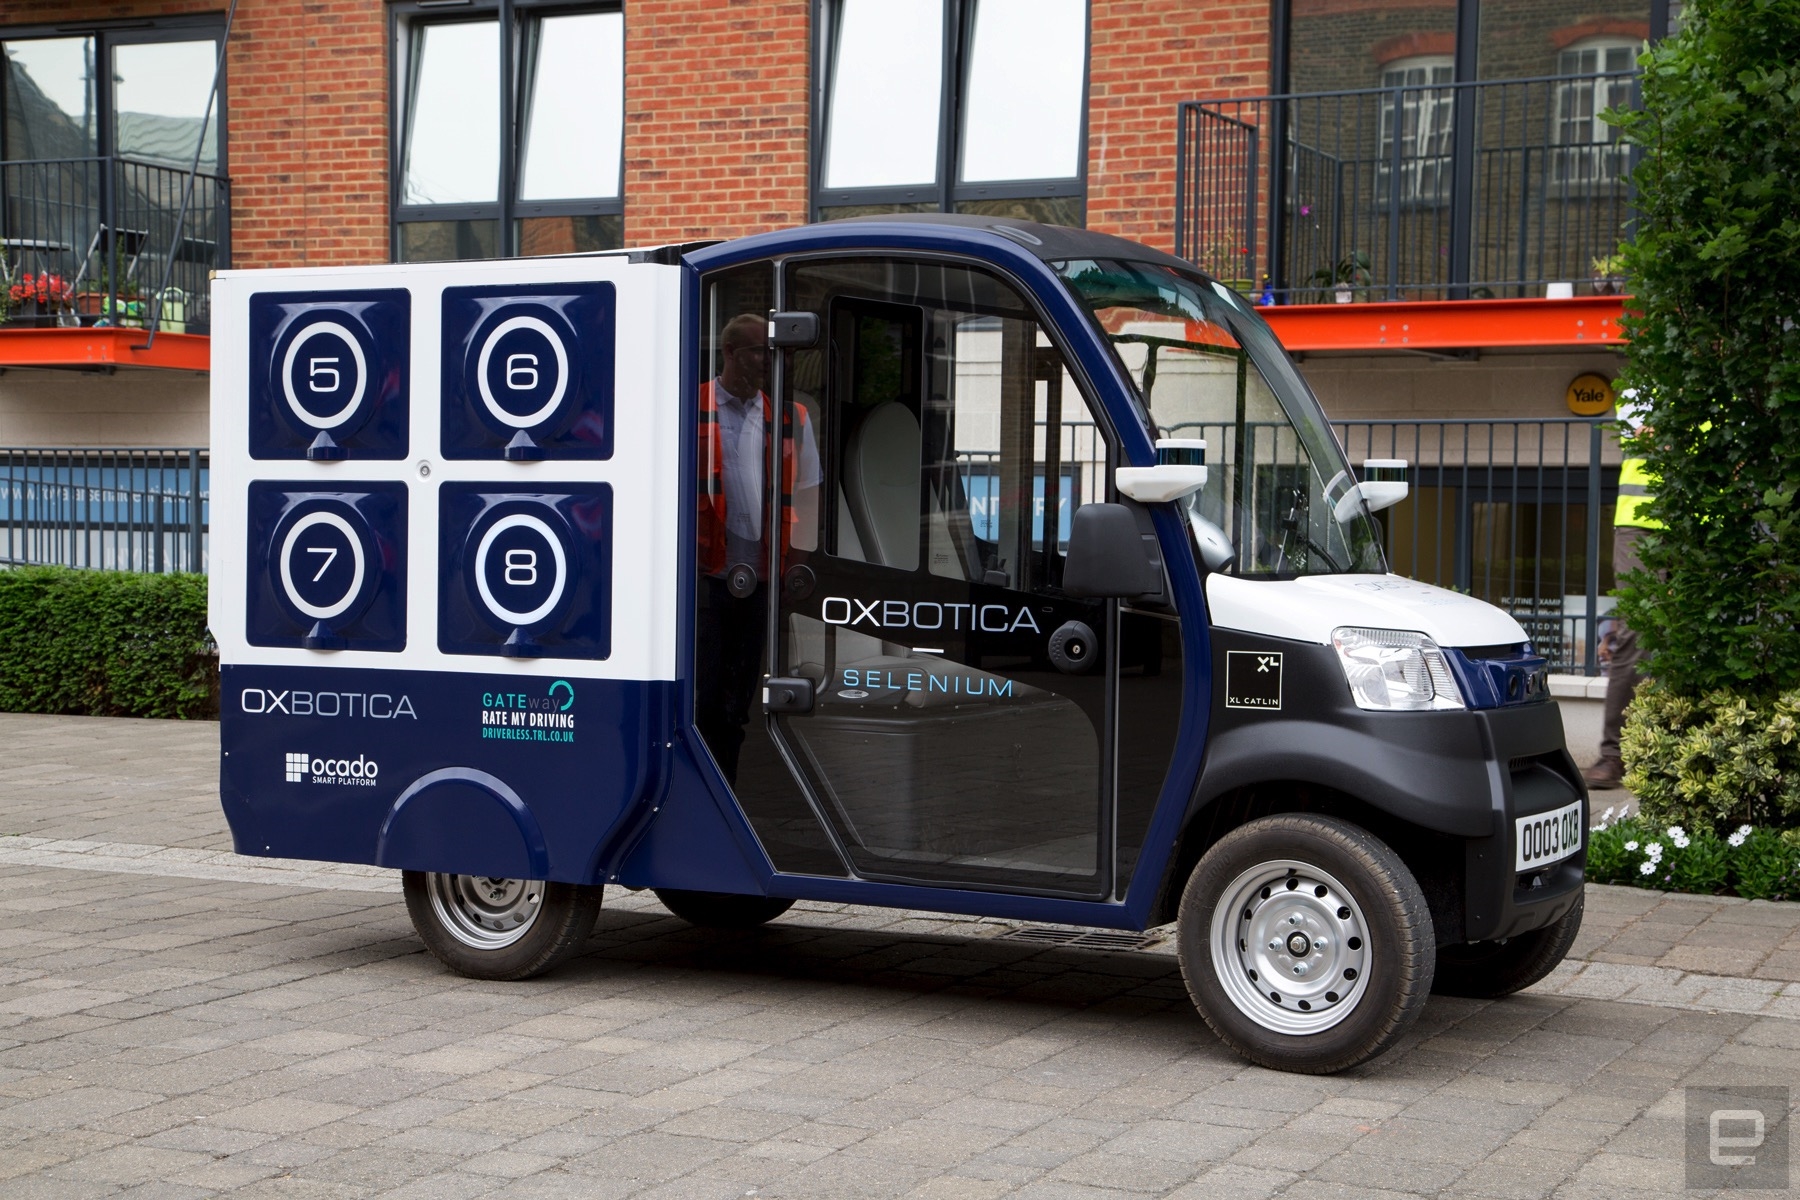 Ocado's driverless delivery van is a glimpse of the future | DeviceDaily.com